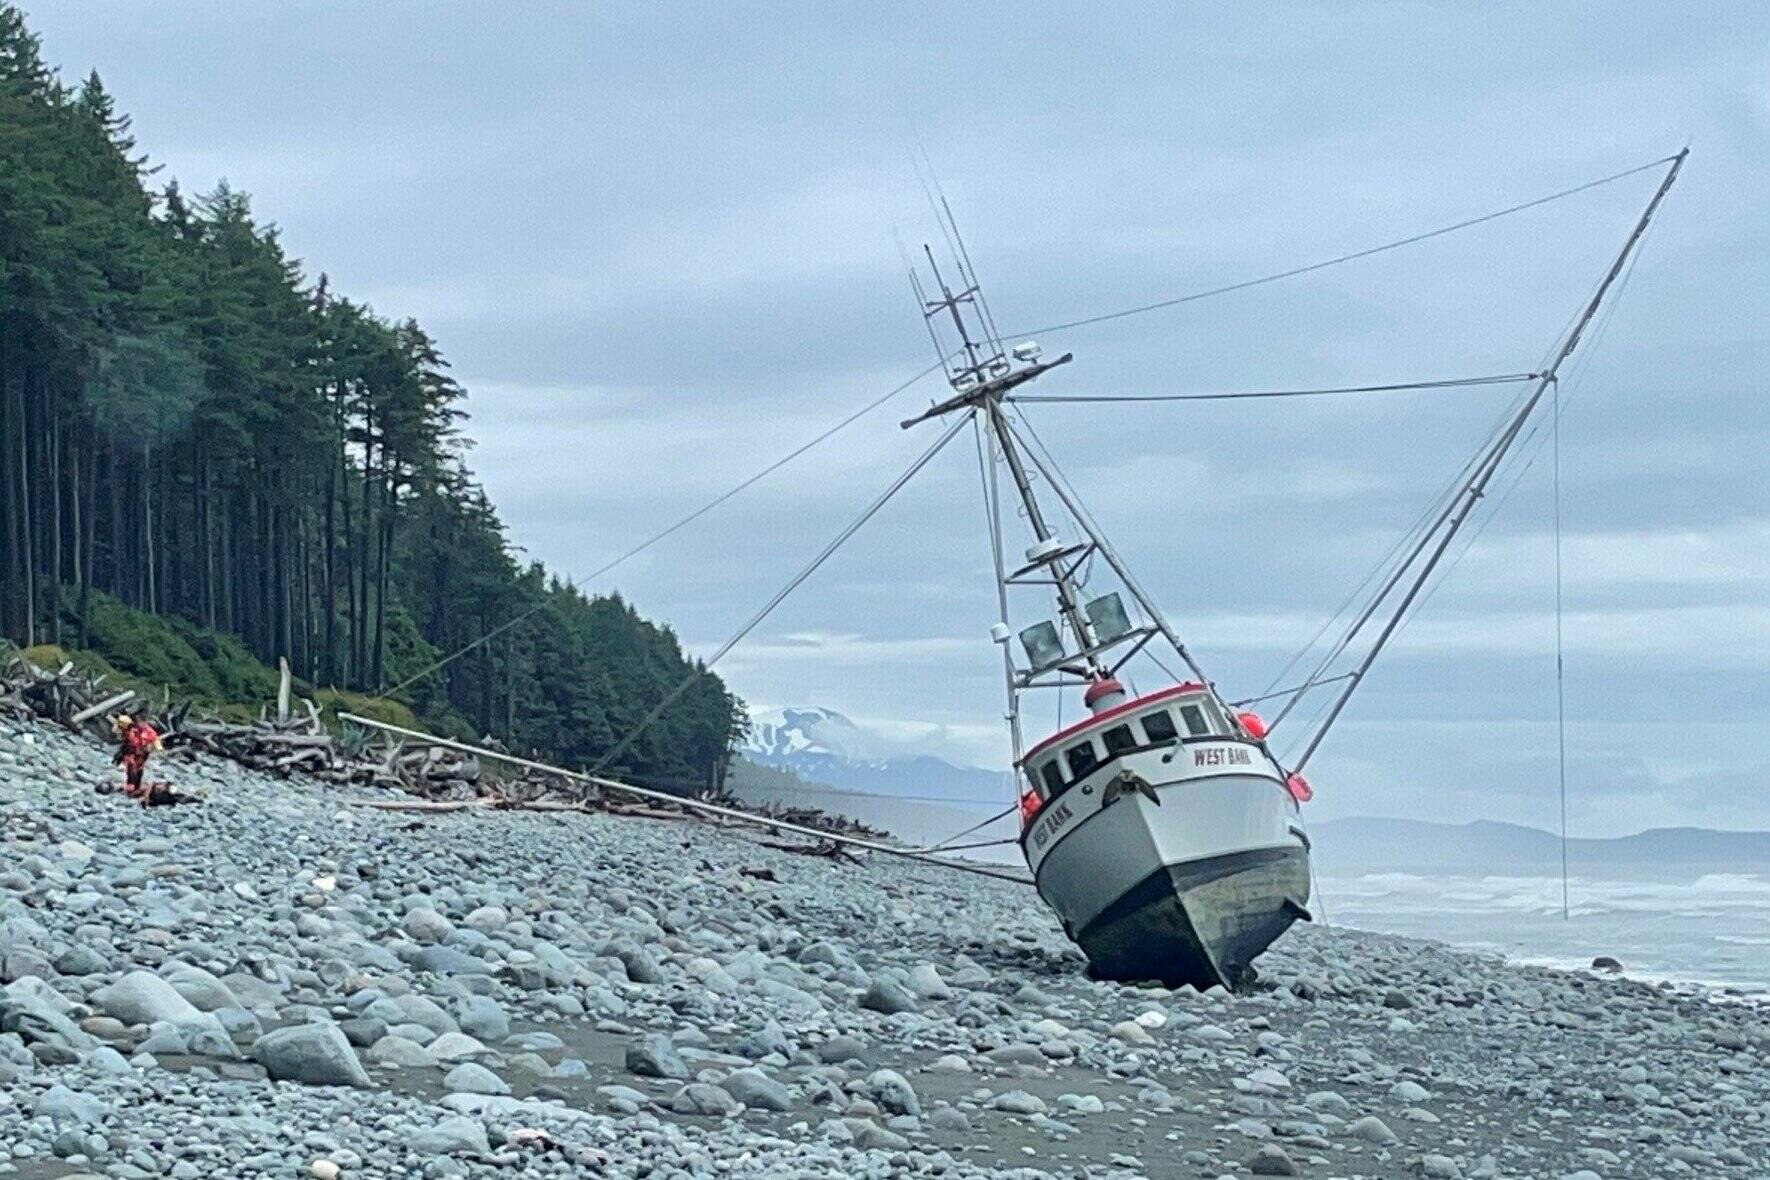 A Coast Guard aircrew fro Coast Guard Air Station Sitka rescued a boat’s captain after his vessel ran aground southeast of Yakutat on Thursday morning. (Courtesy photo / USCG)